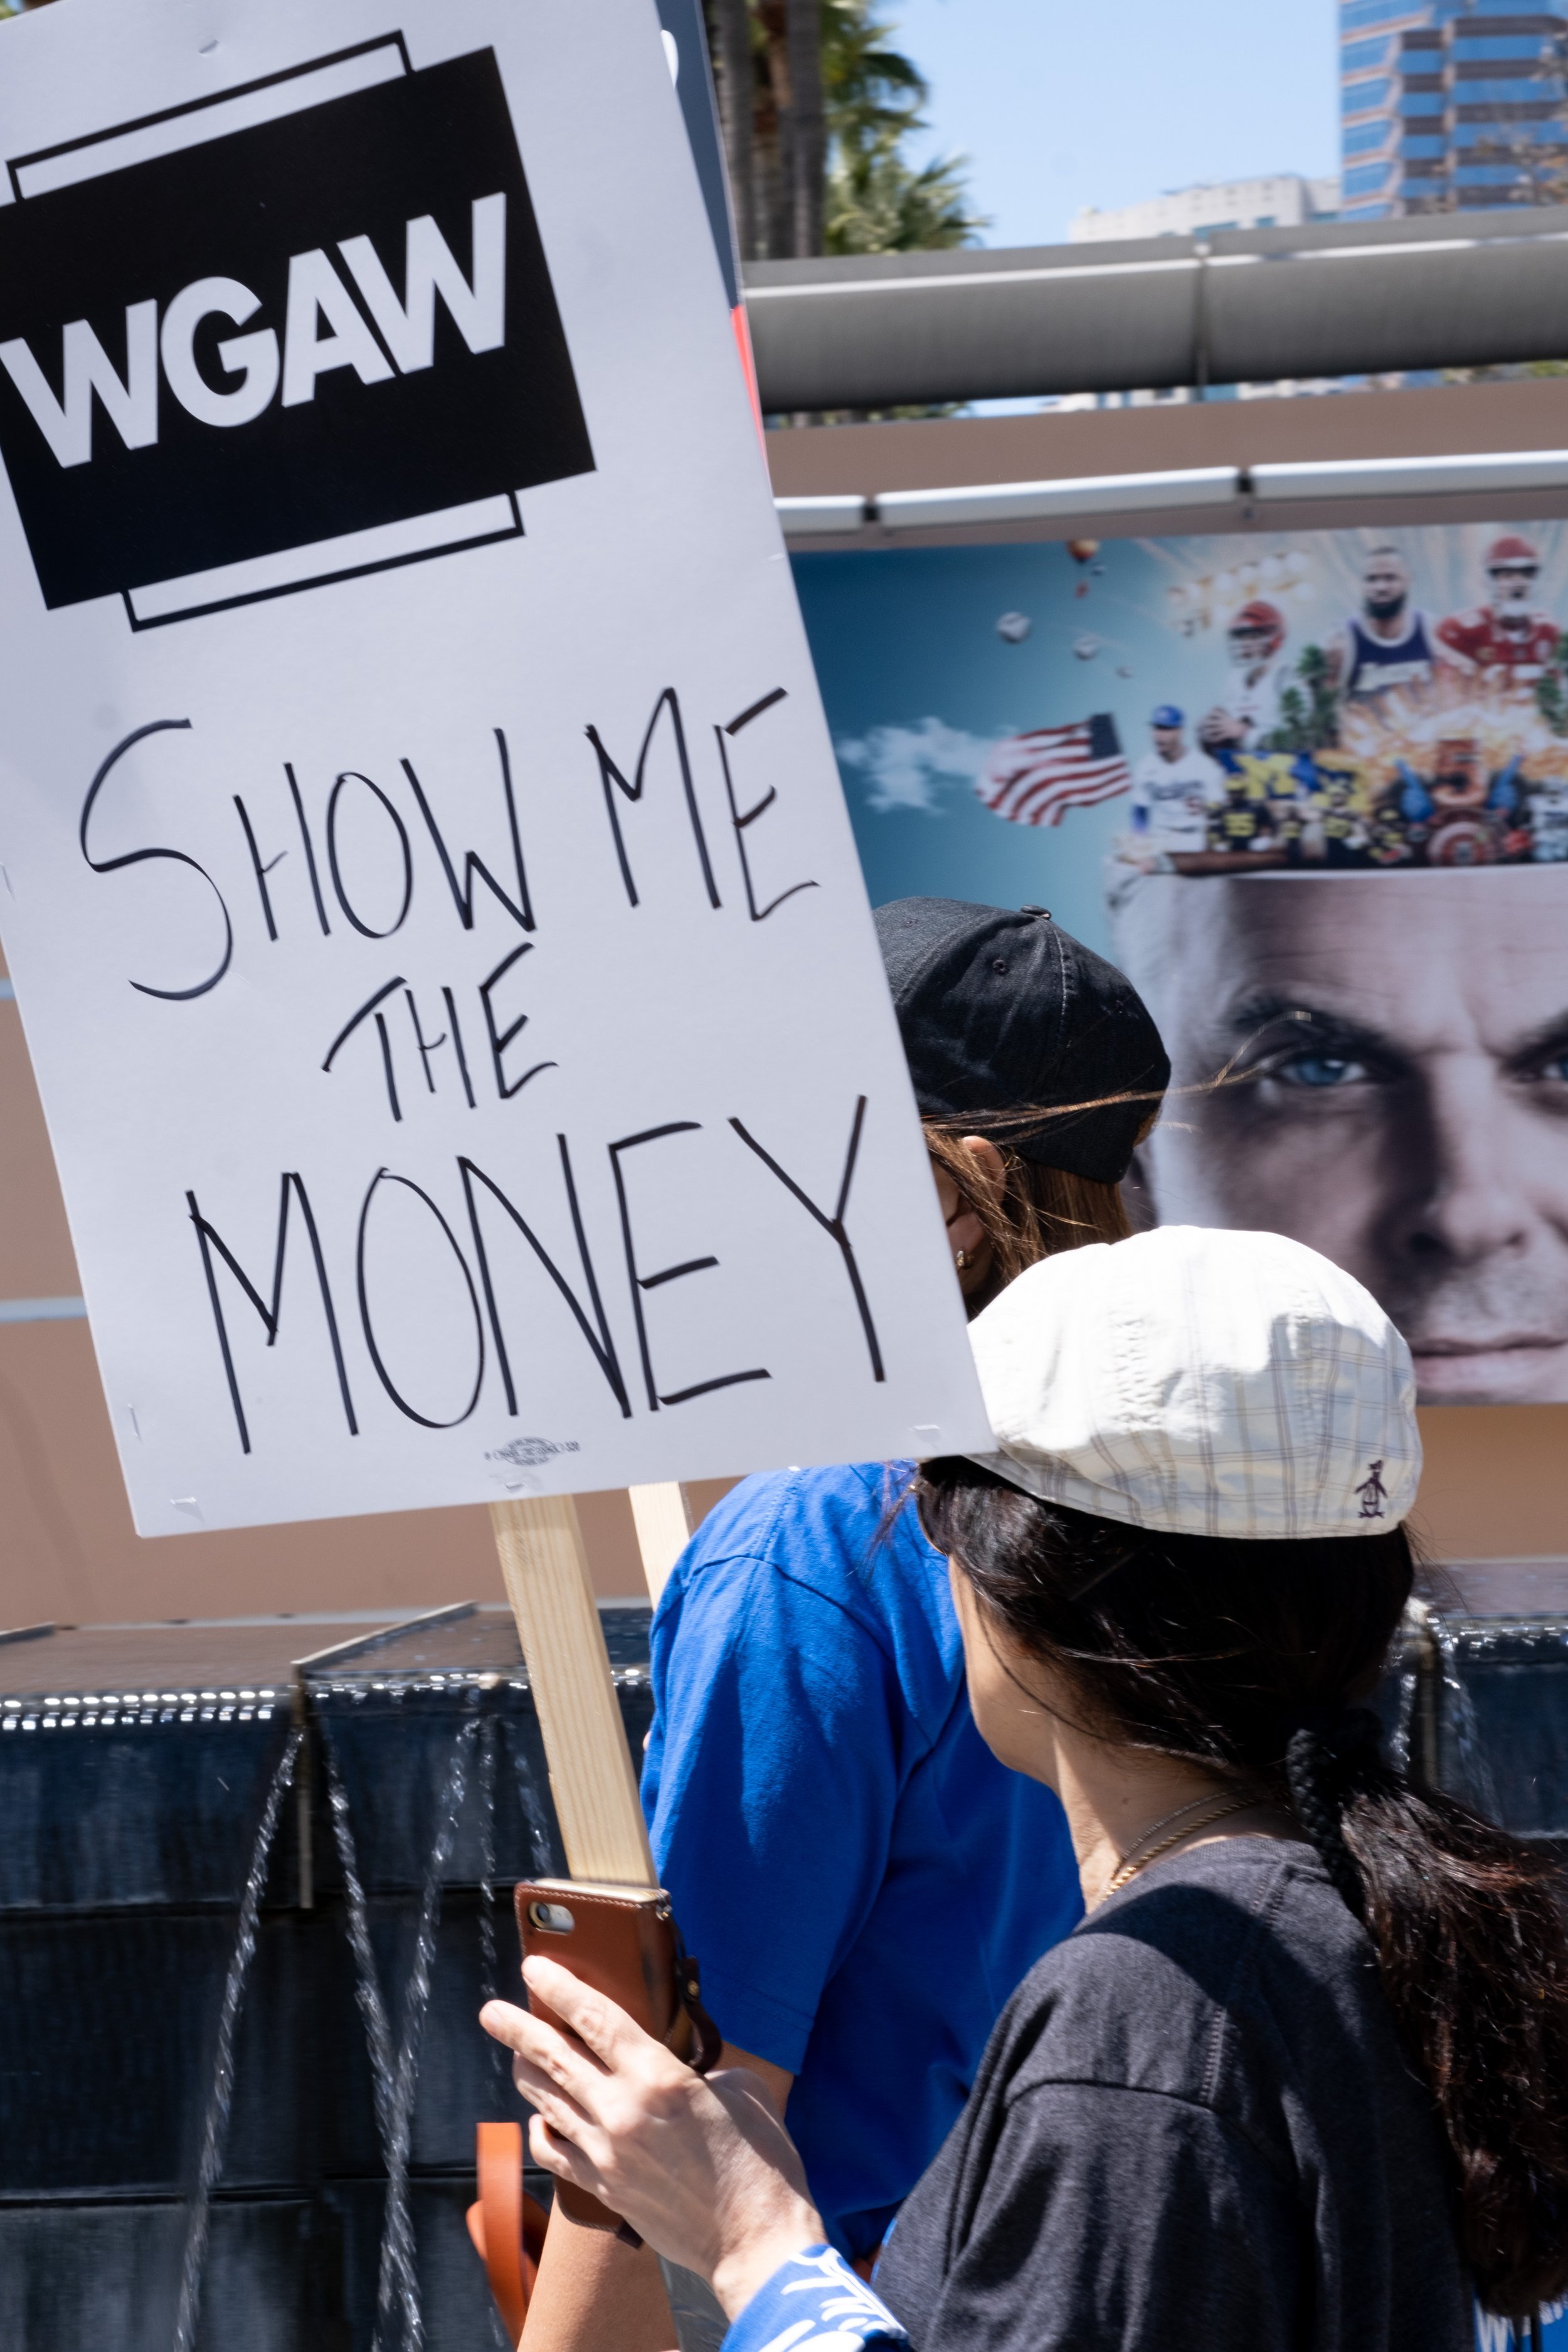  Tuesday May 2nd, 2023 marks the first time the Writers Guild of America (WGA) has gone on strike since 2007. Protesters march in front of Fox Studios on Pico Blvd in Los Angeles, Calif. holding signs and wearing blue t-shirts showing support for the